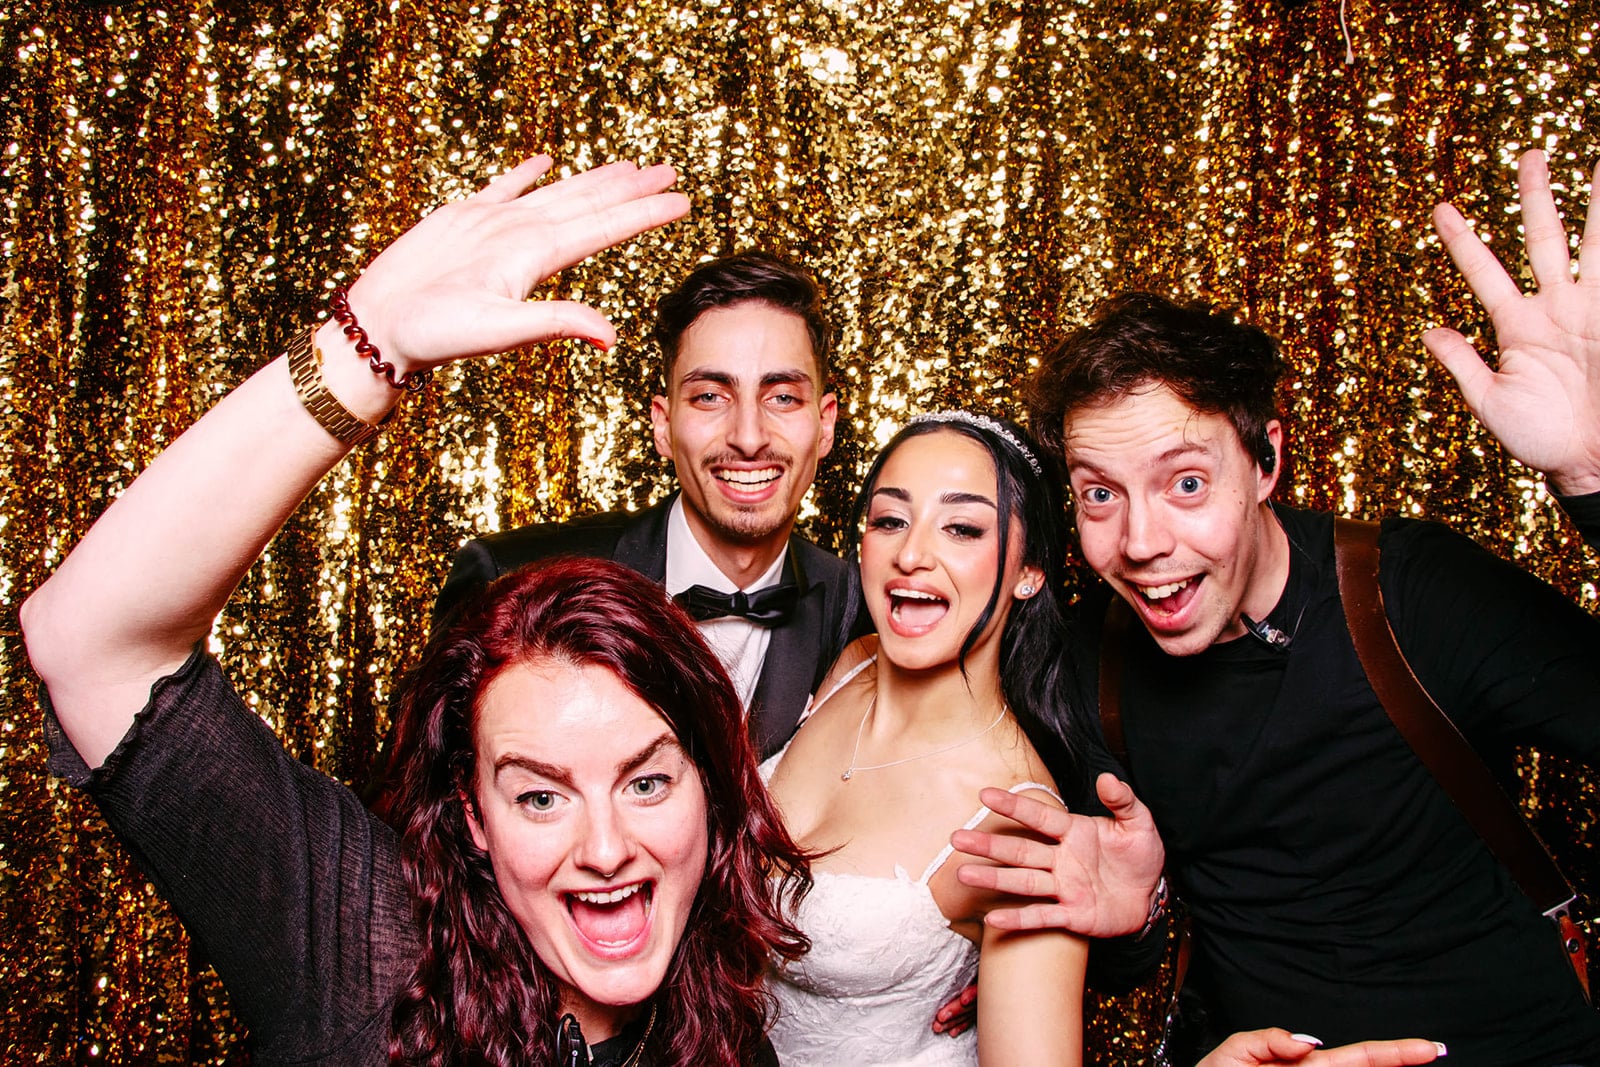 About us: A group of people pose for a picture in a golden photo booth.